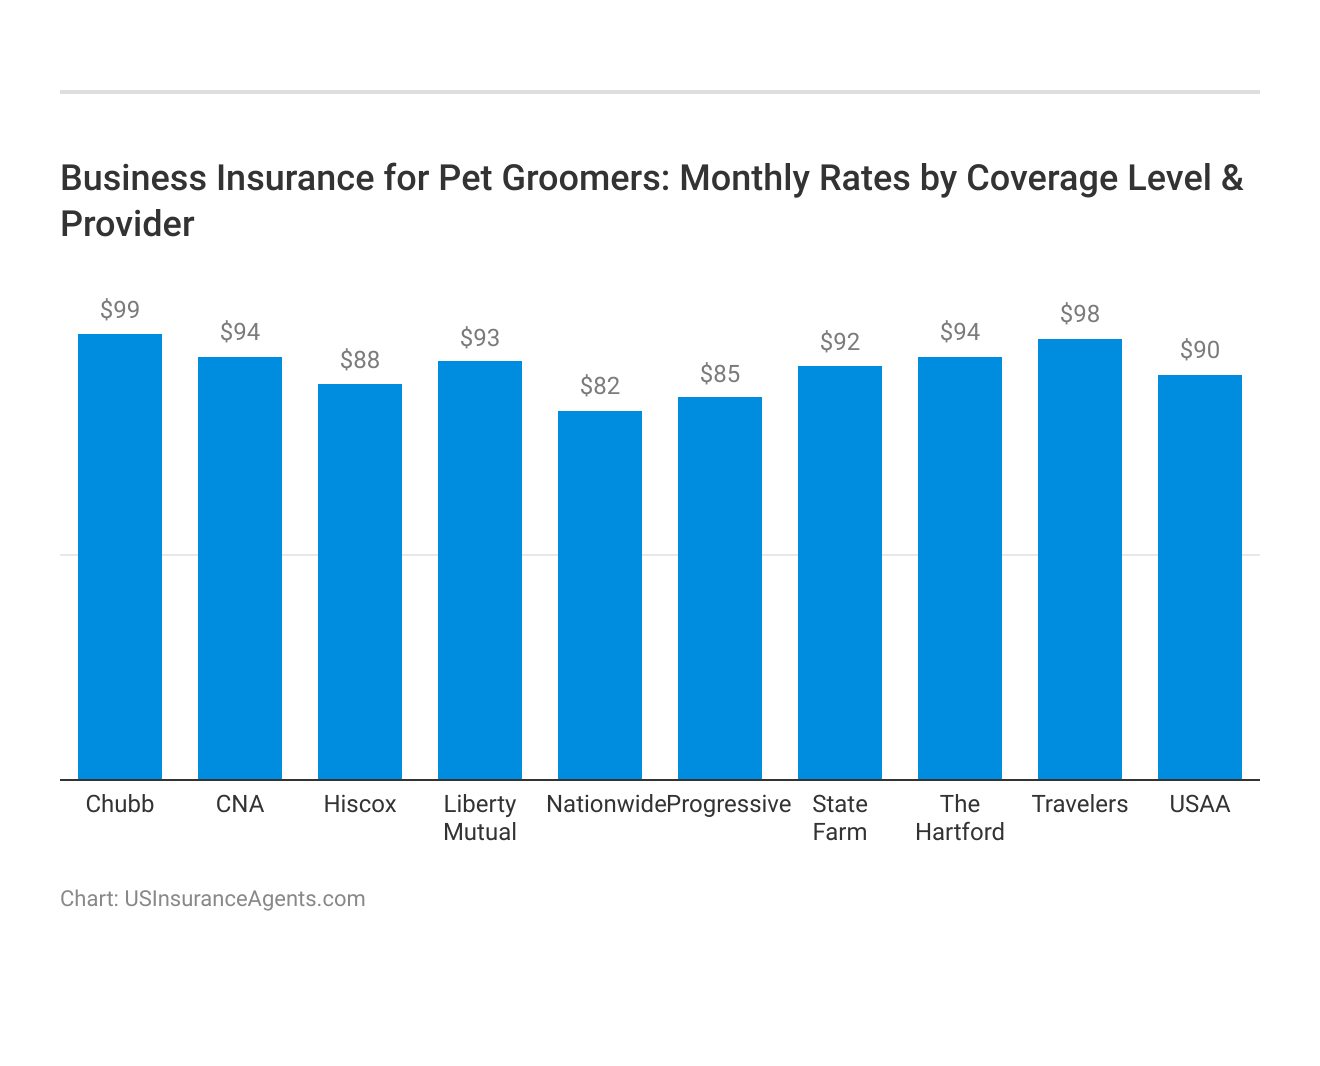 <h3>Business Insurance for Pet Groomers: Monthly Rates by Coverage Level & Provider</h3>